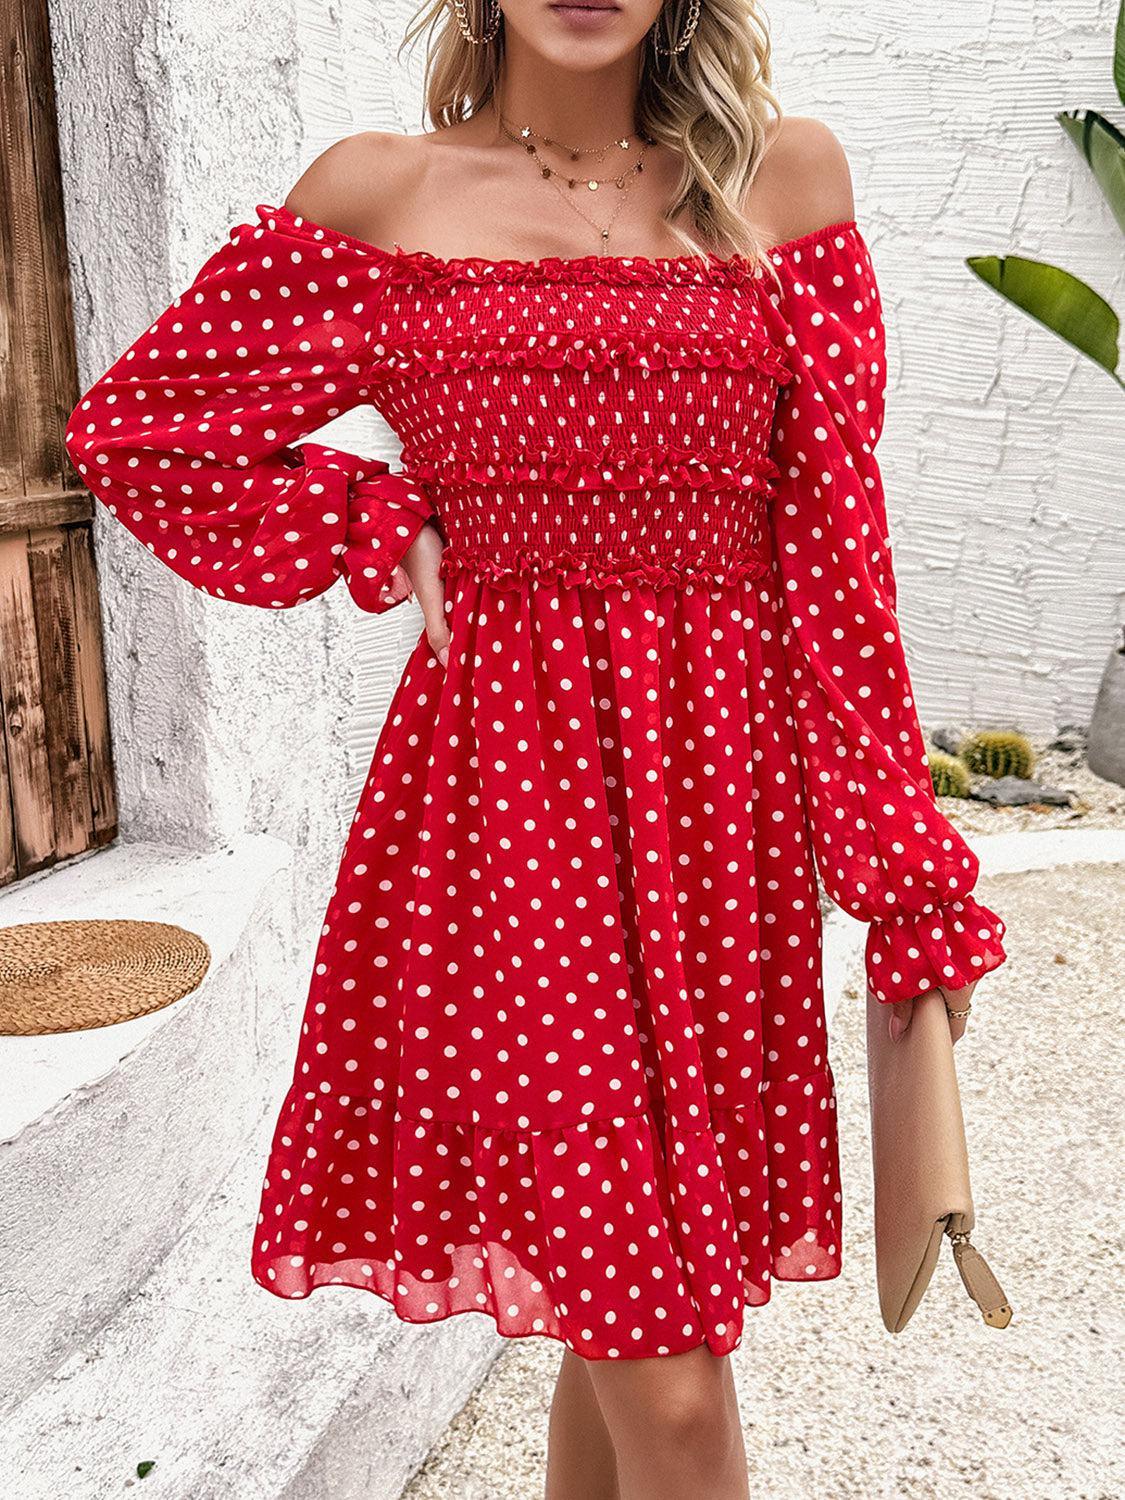 a woman wearing a red and white polka dot dress